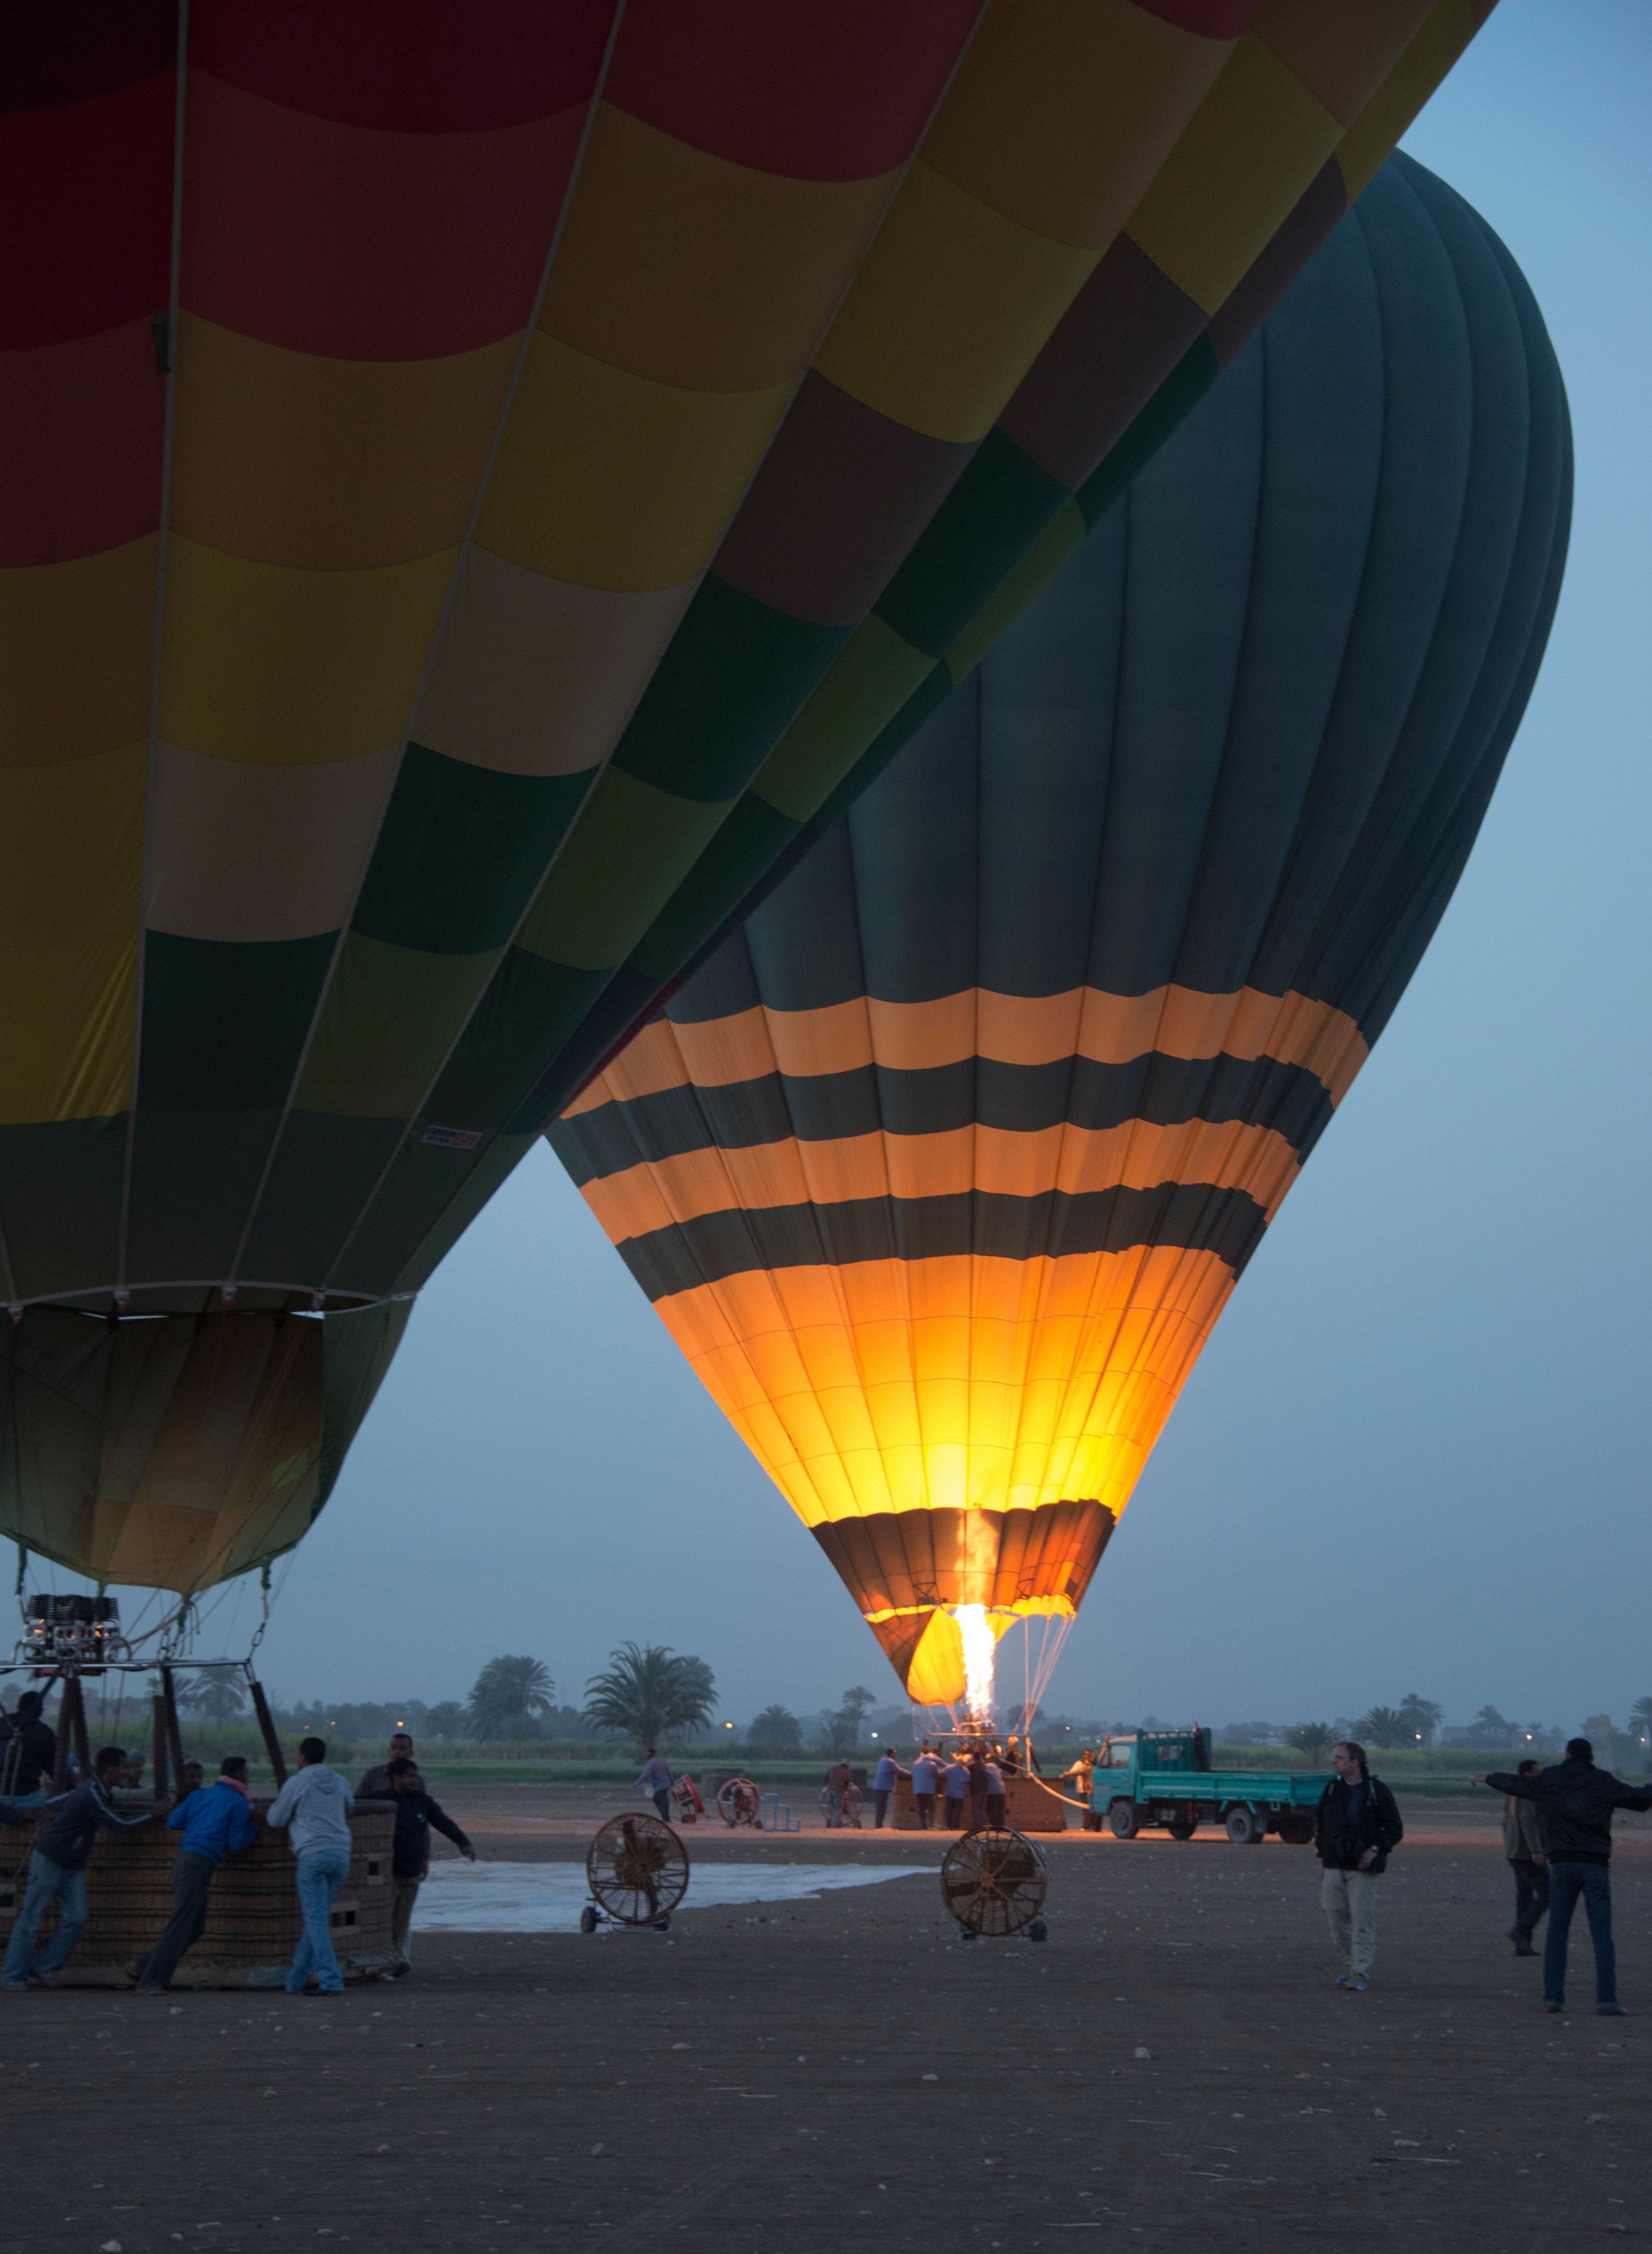 The hot-air balloon that crashed in February gets ready for take-off. Photo: AFP